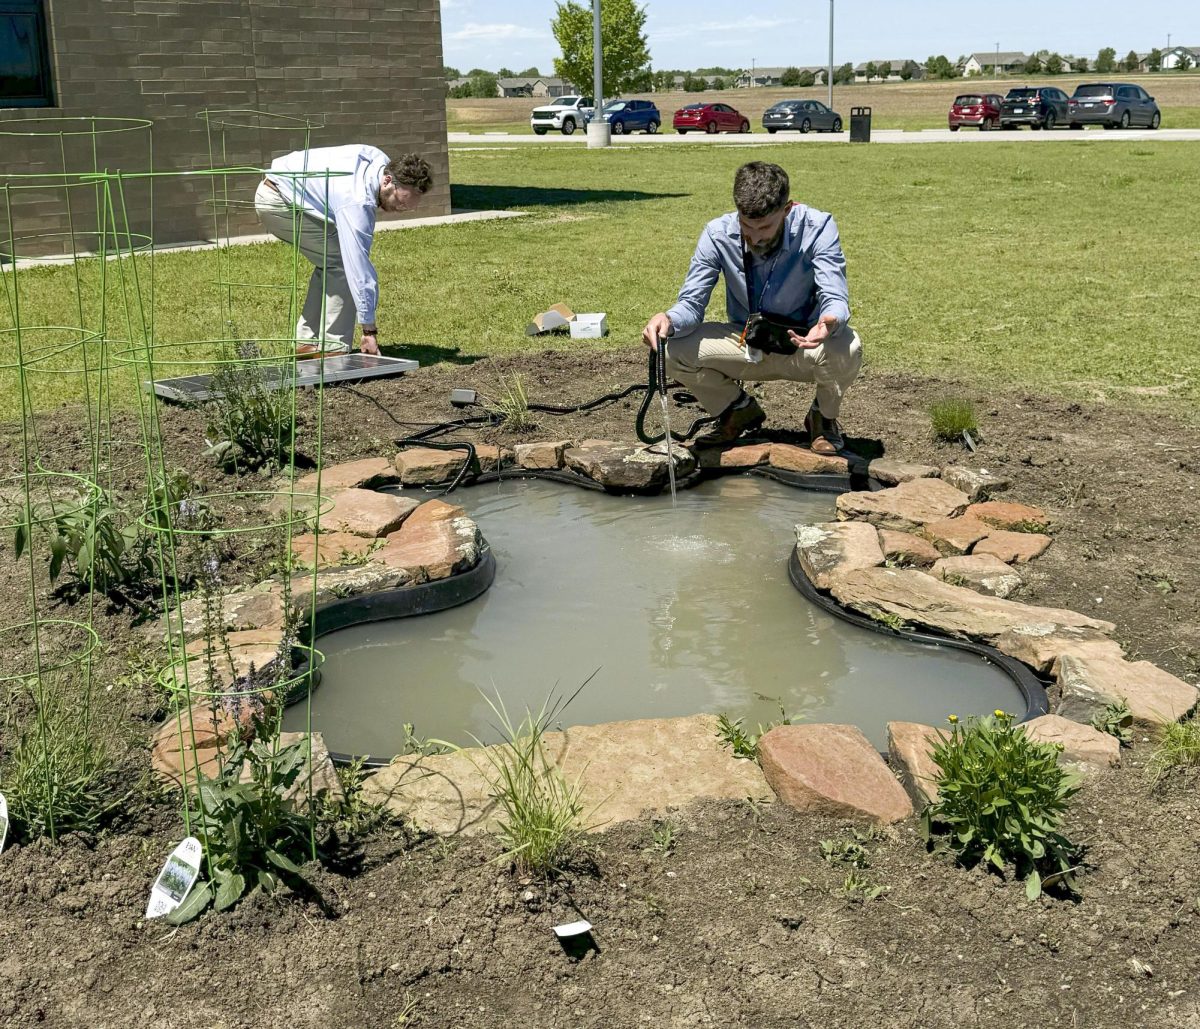 The pond is currently undergoing construction and is expected to be completed by the end of the month.